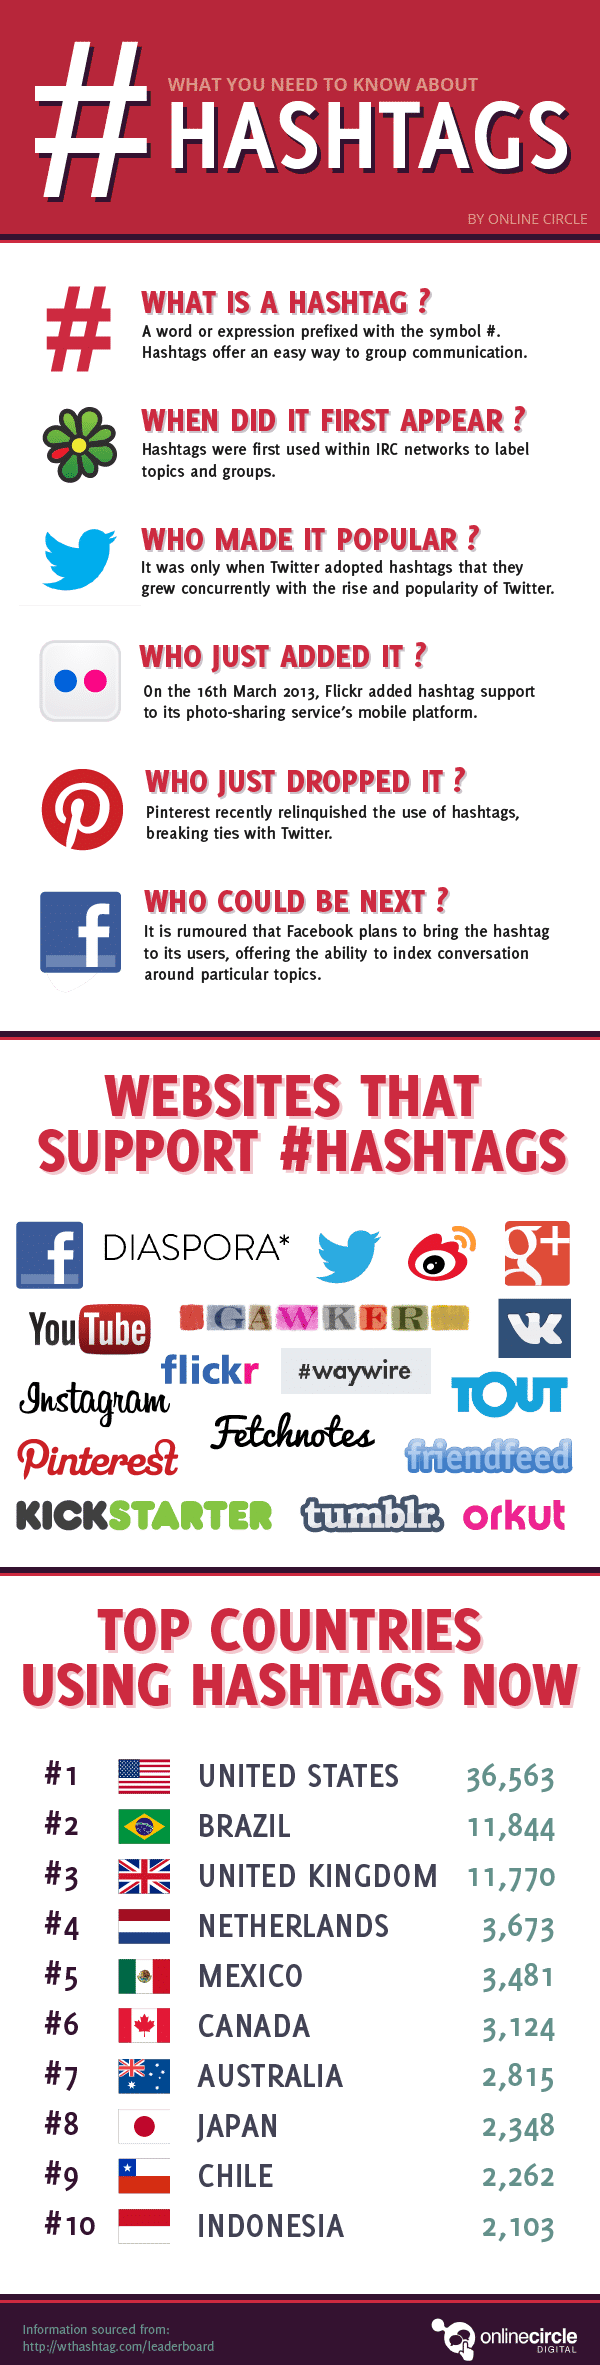 speed-guide-to-hashtags-infographic